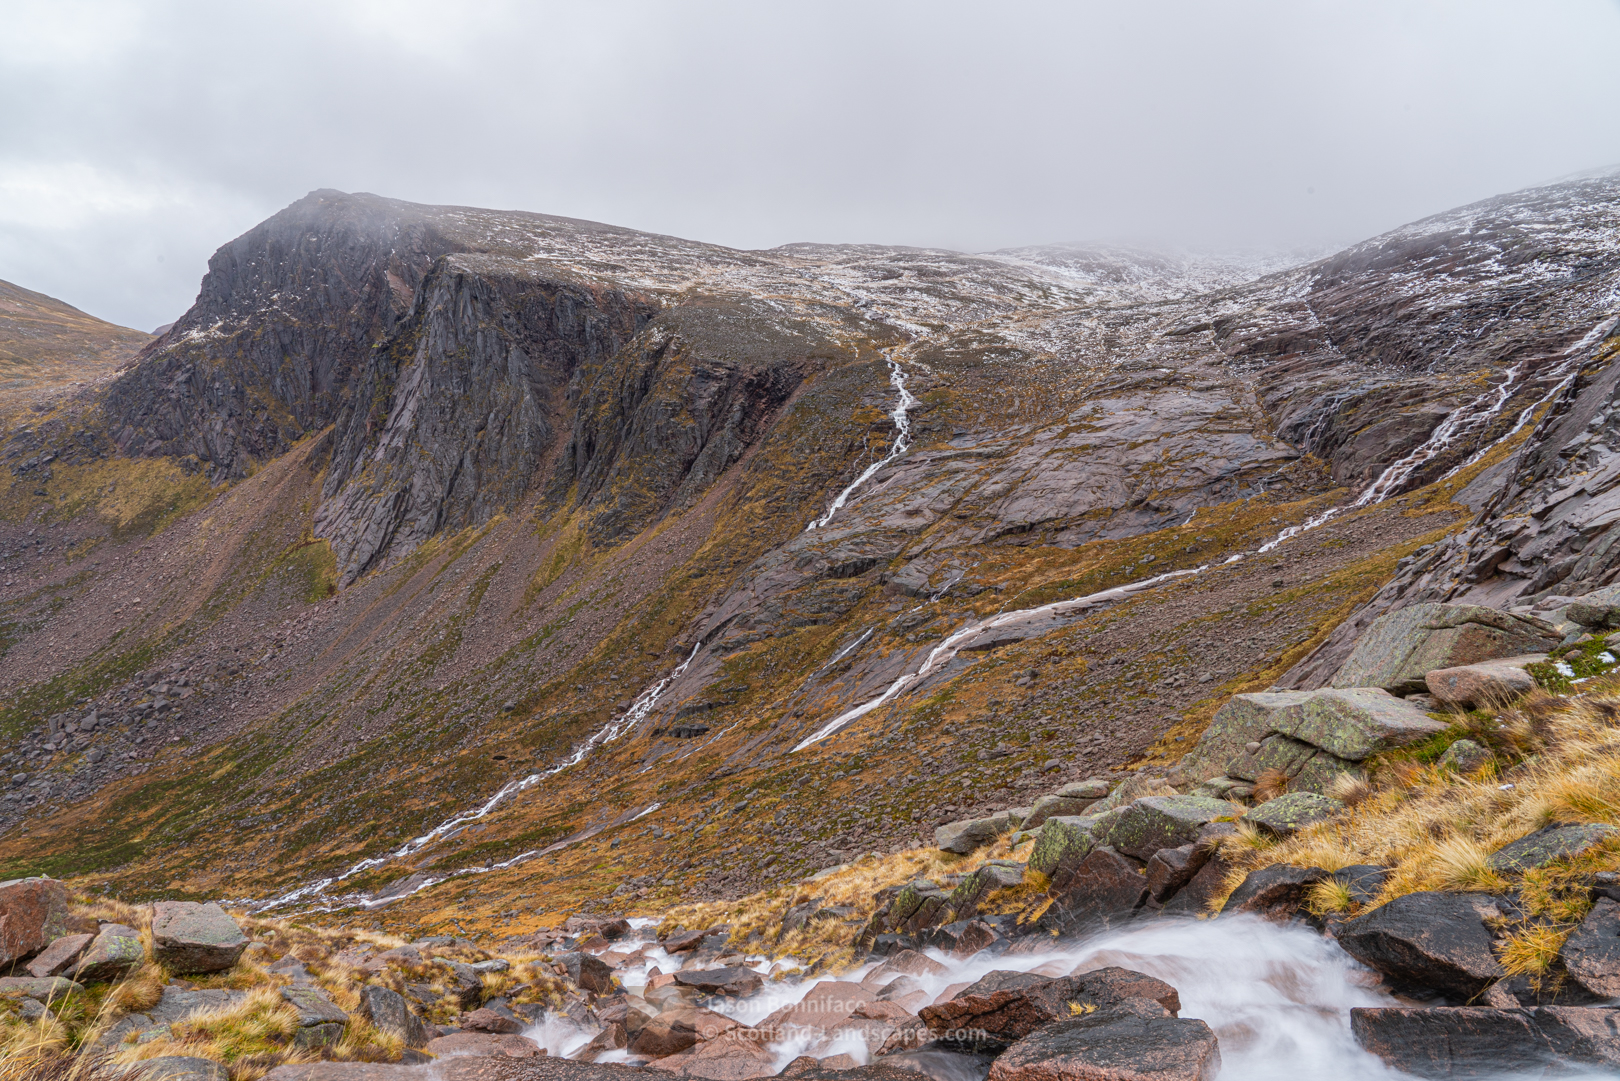 The Shelter Stone Crag and Carn Etchachan, Cairngorm